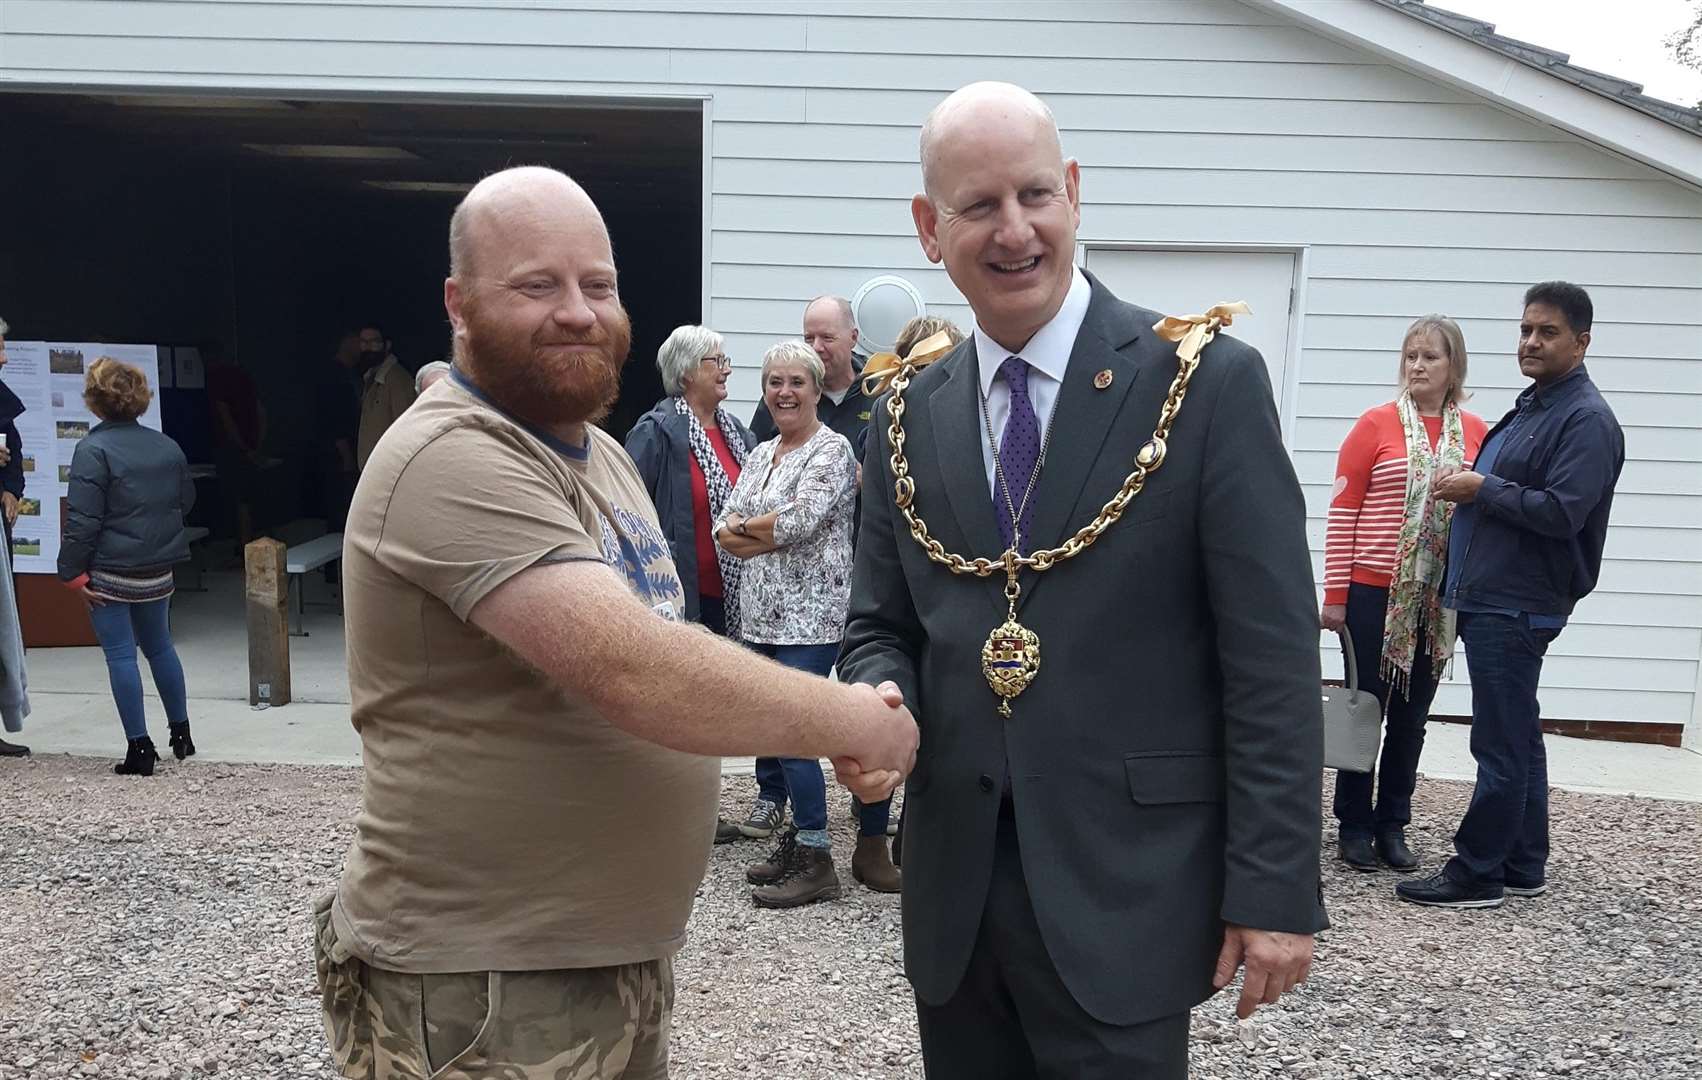 The chairman of Tovil Parish Council, Cllr Lloyd Porter, with the Mayor, Dave Naghi